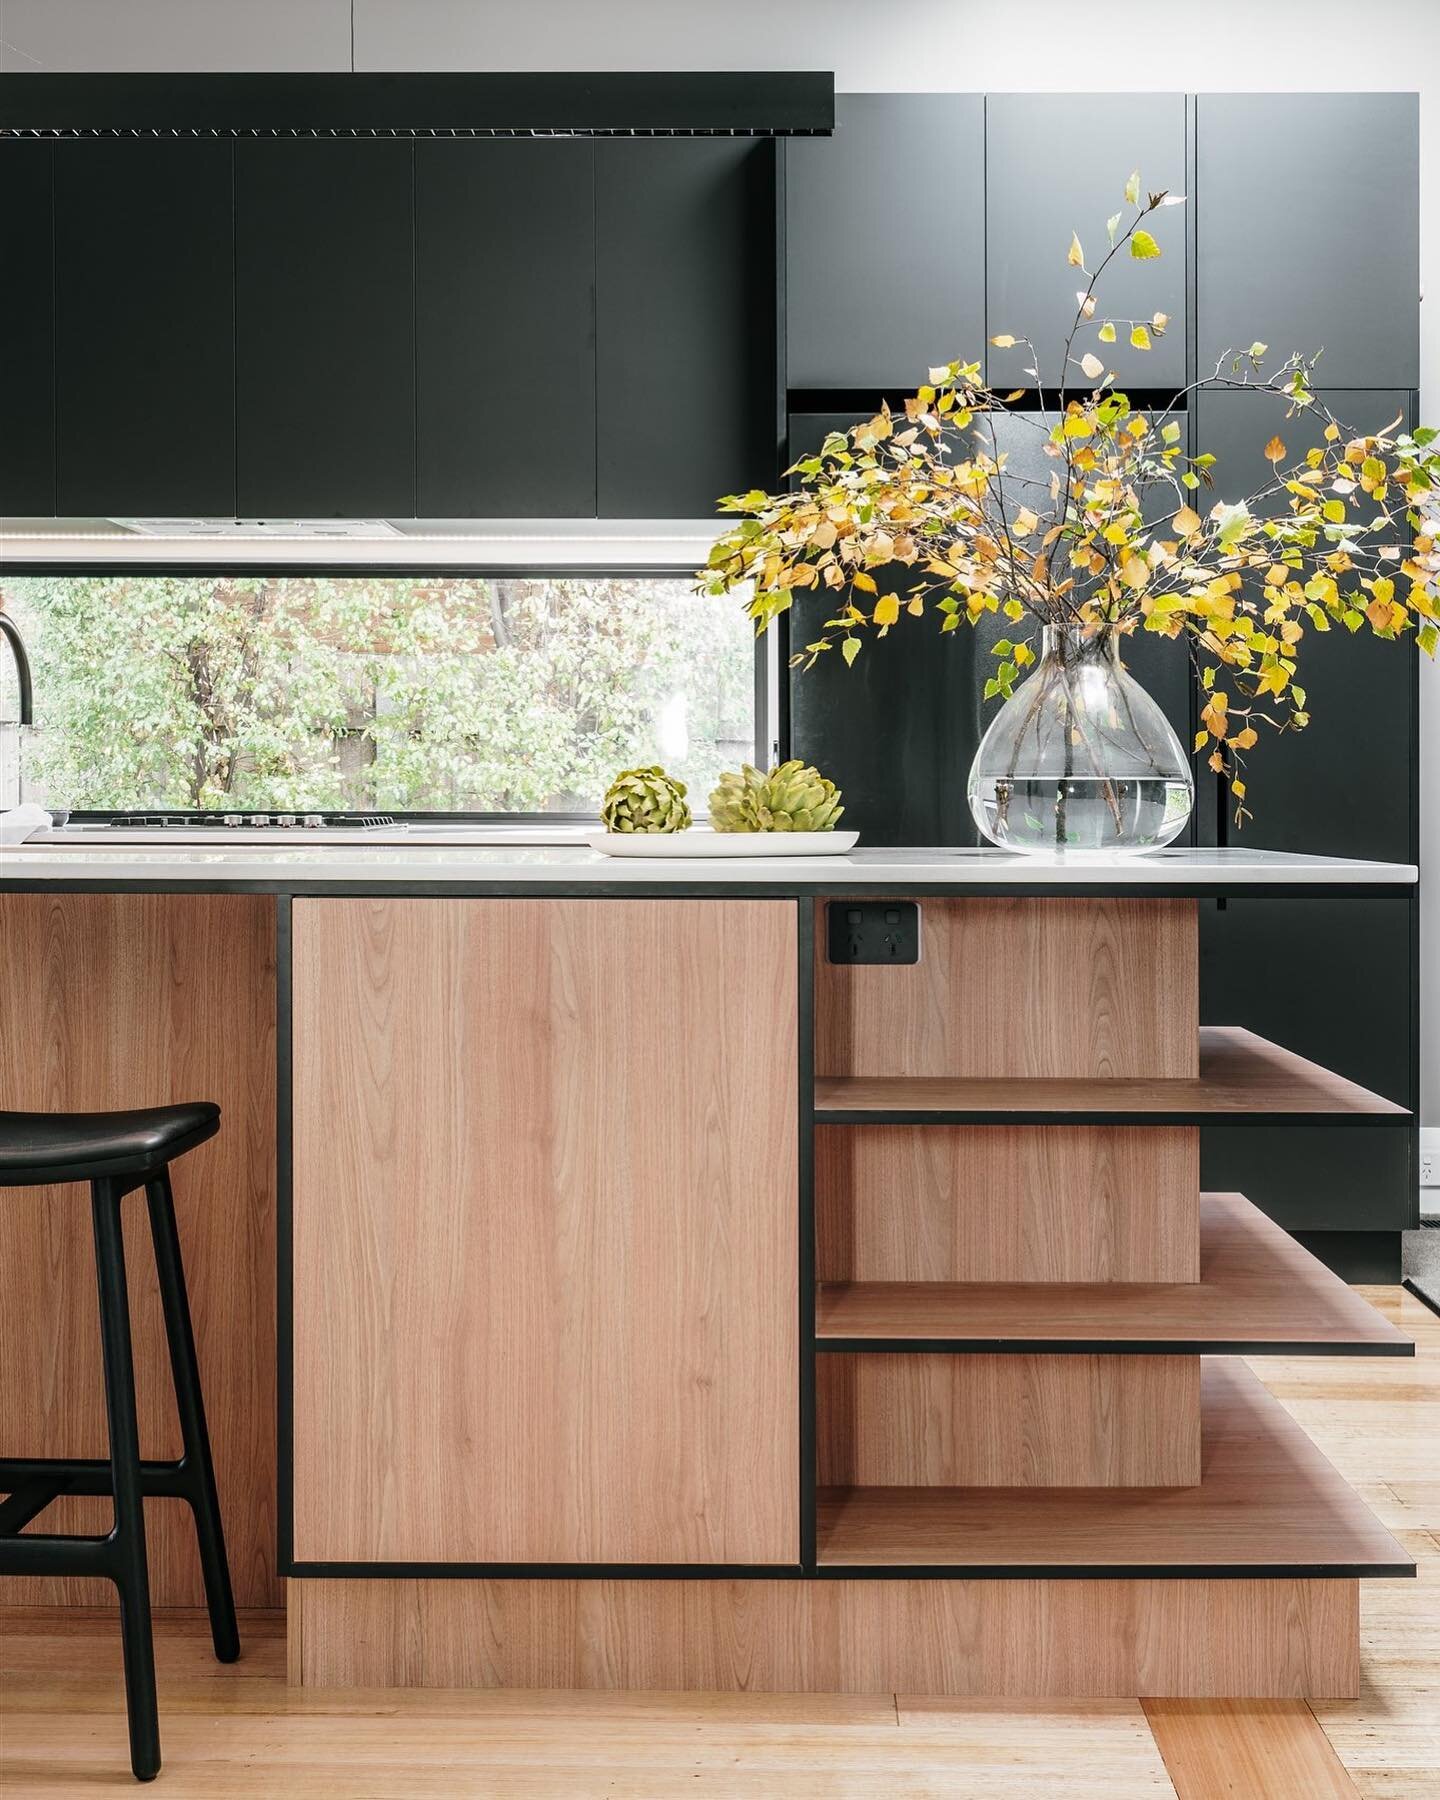 How striking is the black detailing in this contemporary kitchen design?! We love the timber island in our Abbott project which features open timber look shelving, serving as a multi use space for this hero island. 
.
.
.
Interior design: @lydiamaski